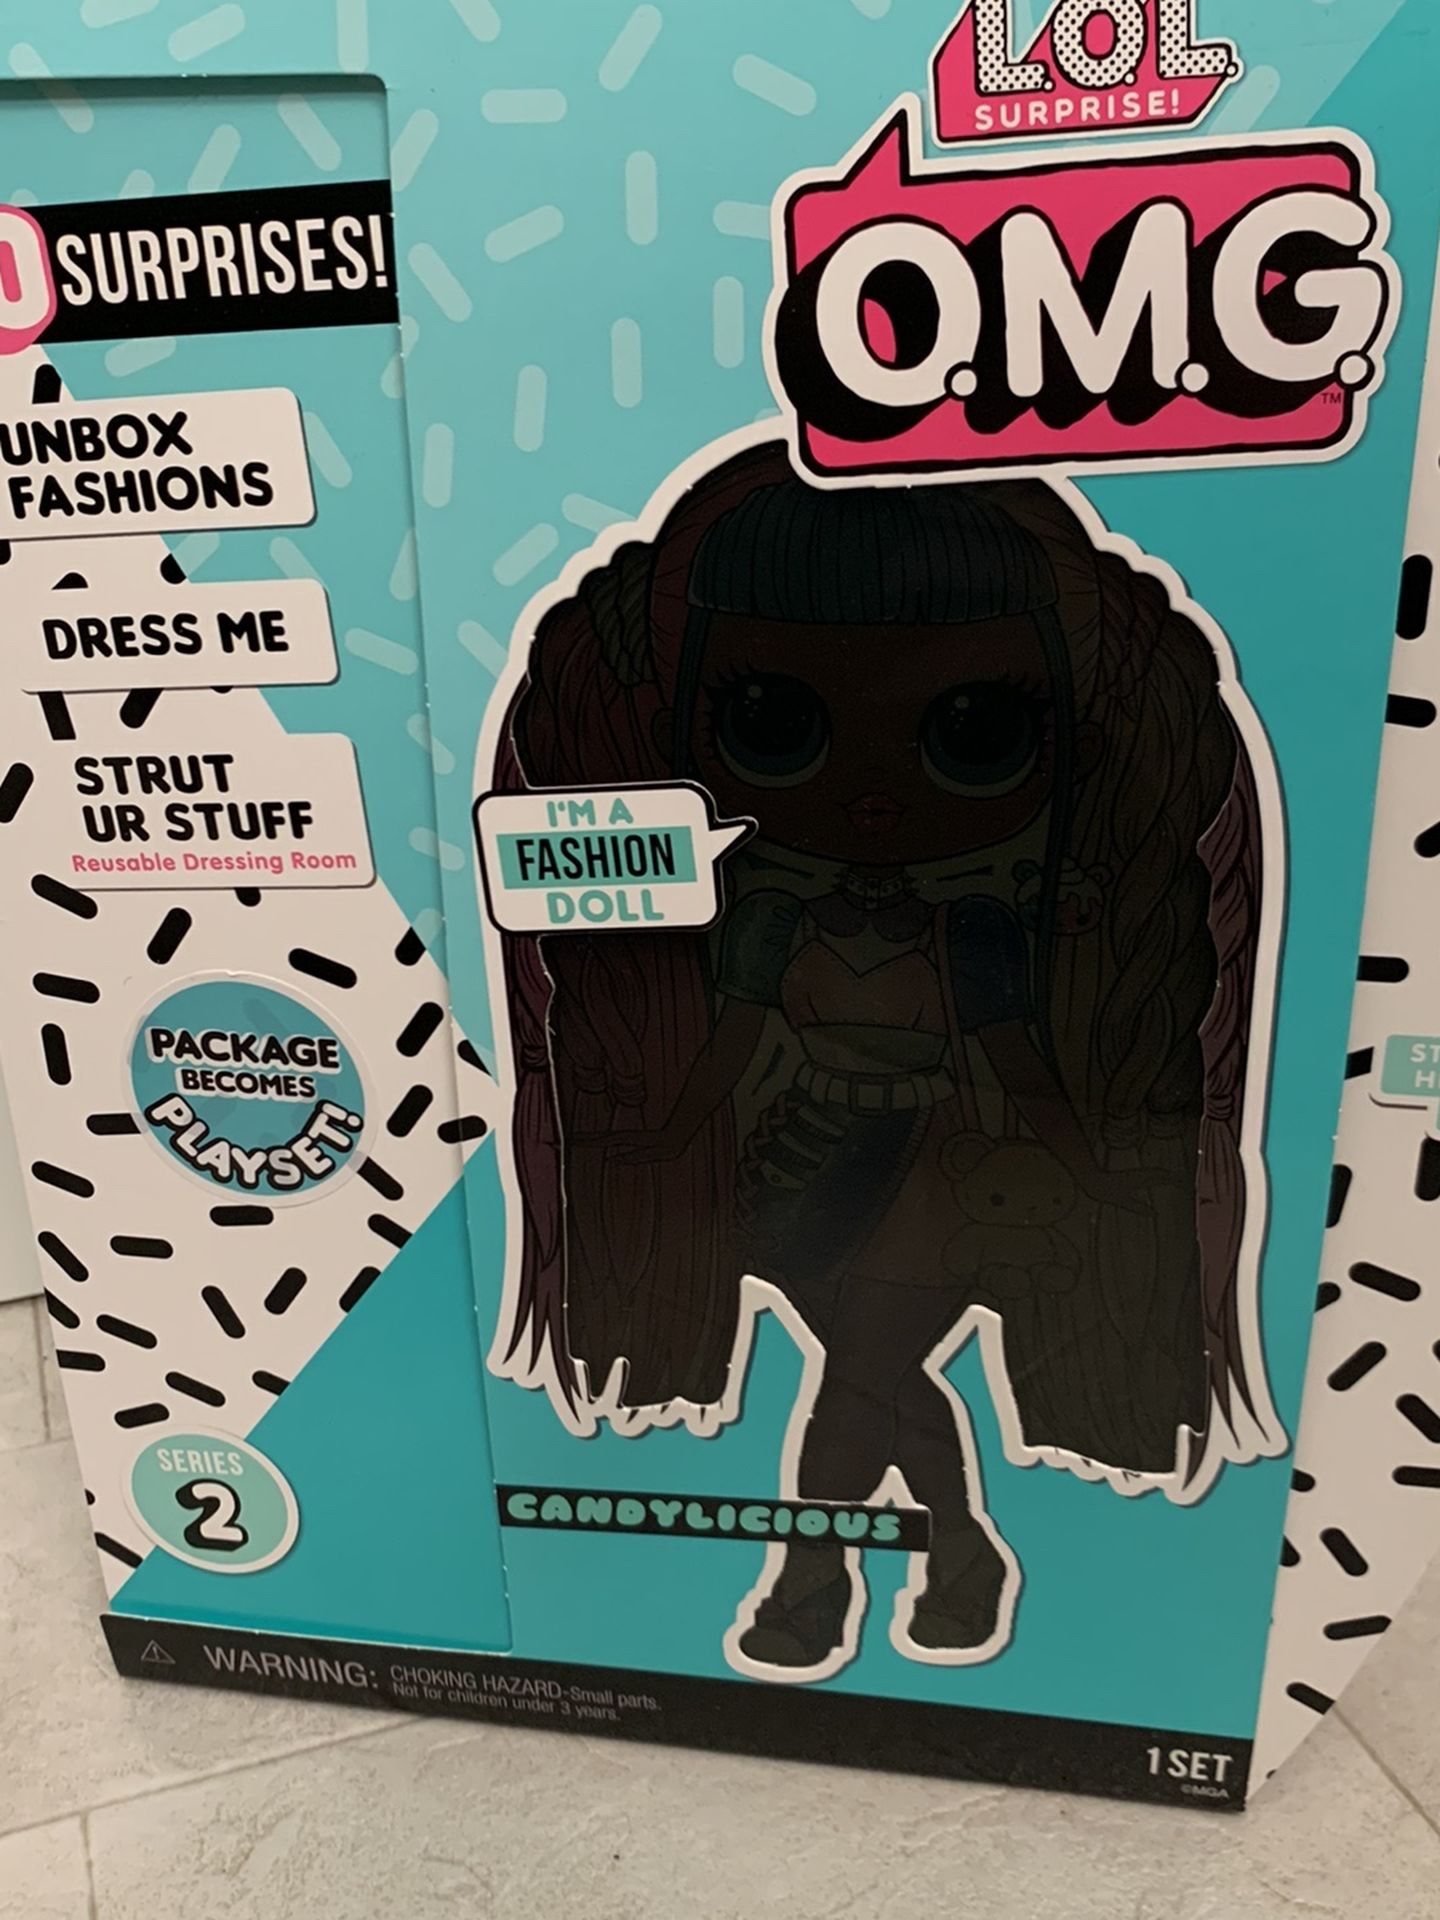 NEW LOL Surprise OMG Doll Candylicious Series 2